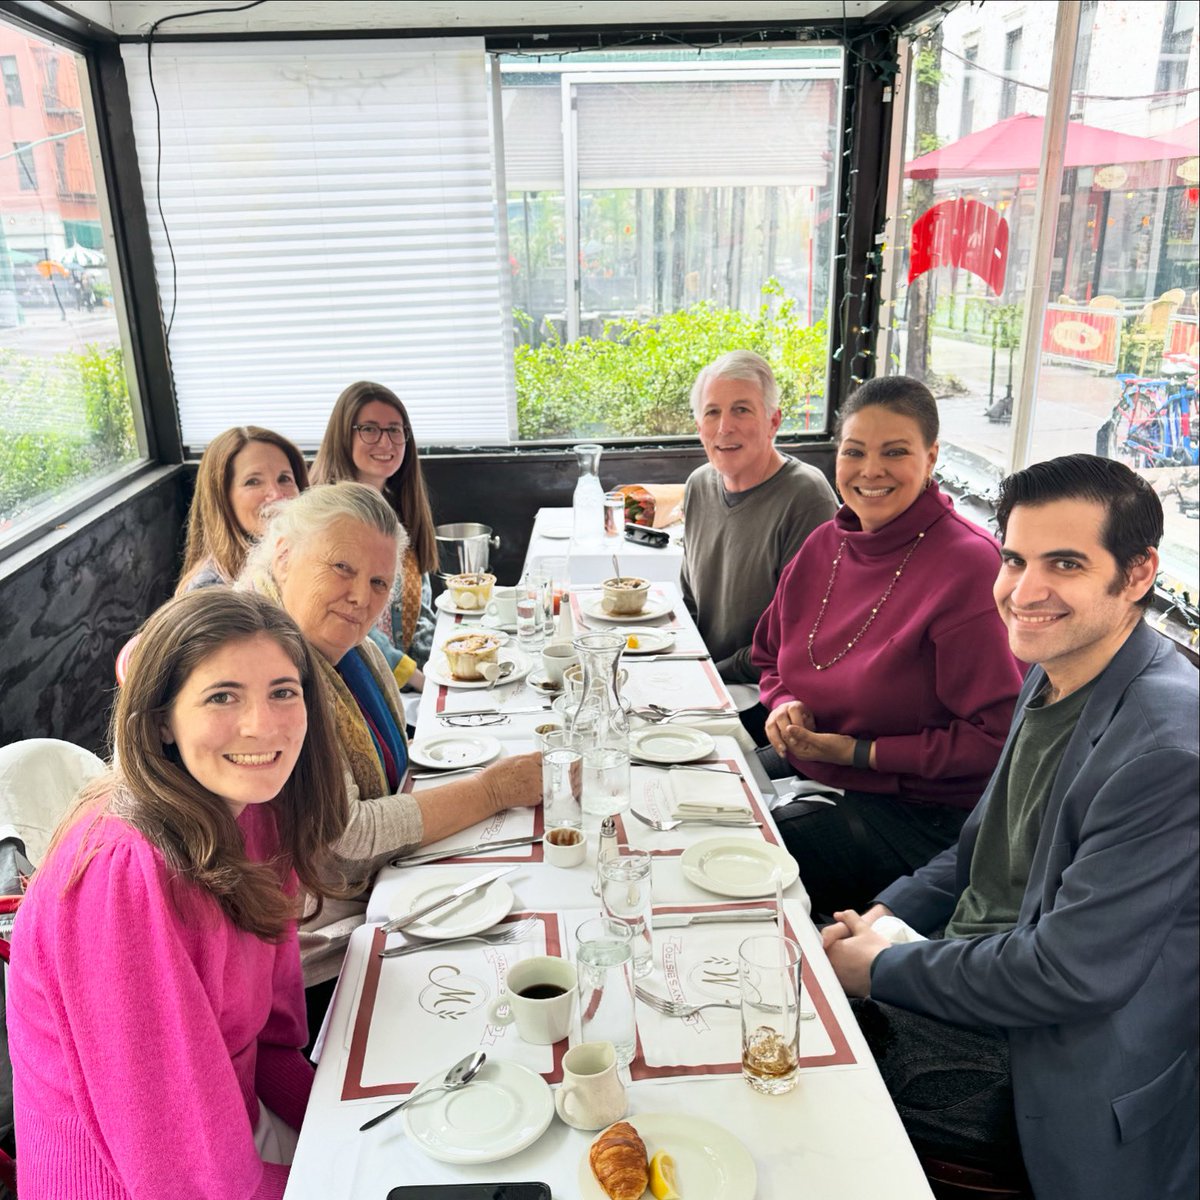 We had the most wonderful Mother’s Day at @mannysbistrony yesterday — we loved celebrating everyone who came to visit! Always marvelous to see you, dear @sarasidnerCNN … cheers to you and your loved ones! 💐❤️✨ #mannysbistro #mothersday #nyc #newyork #newyorkcity #sarasidner